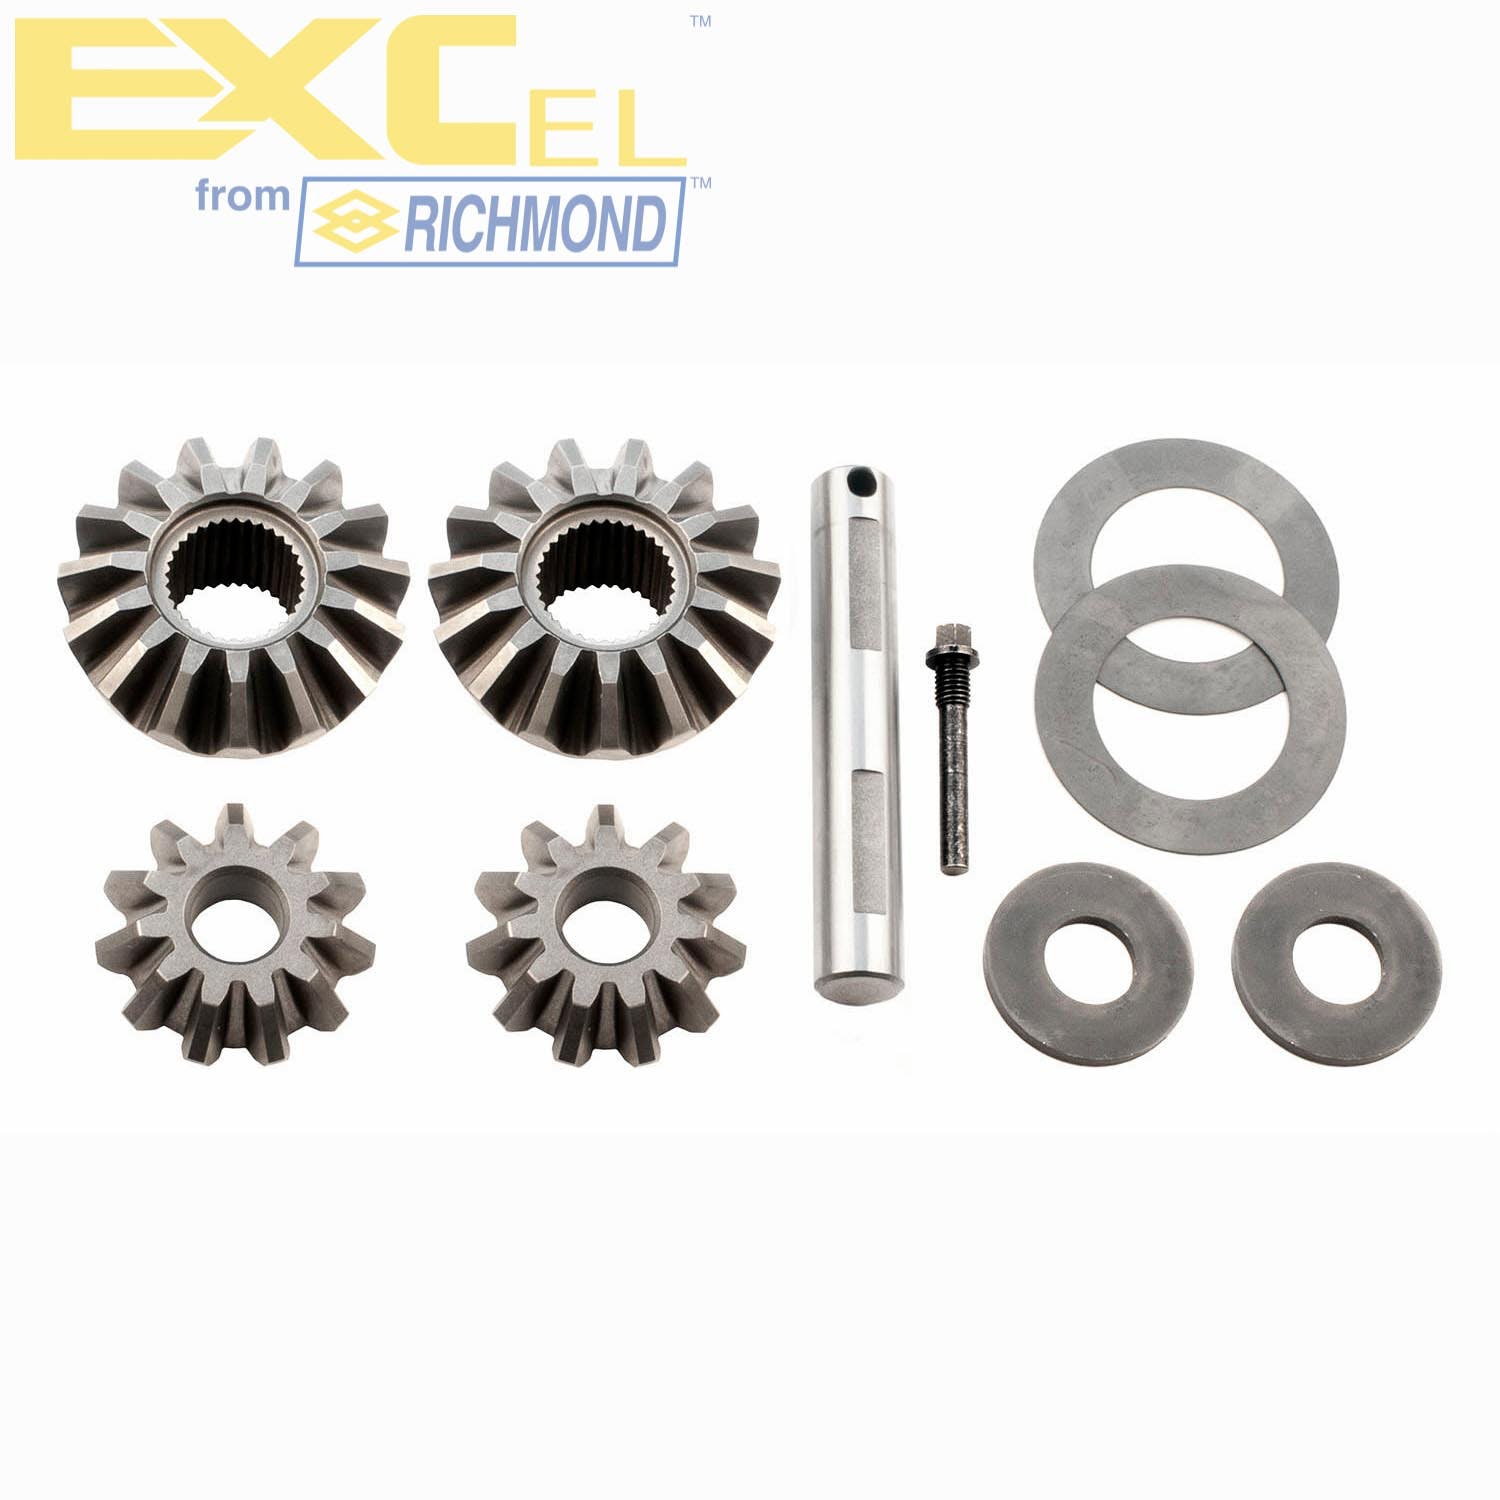 Excel XL-4060 Differential Carrier Gear Kit